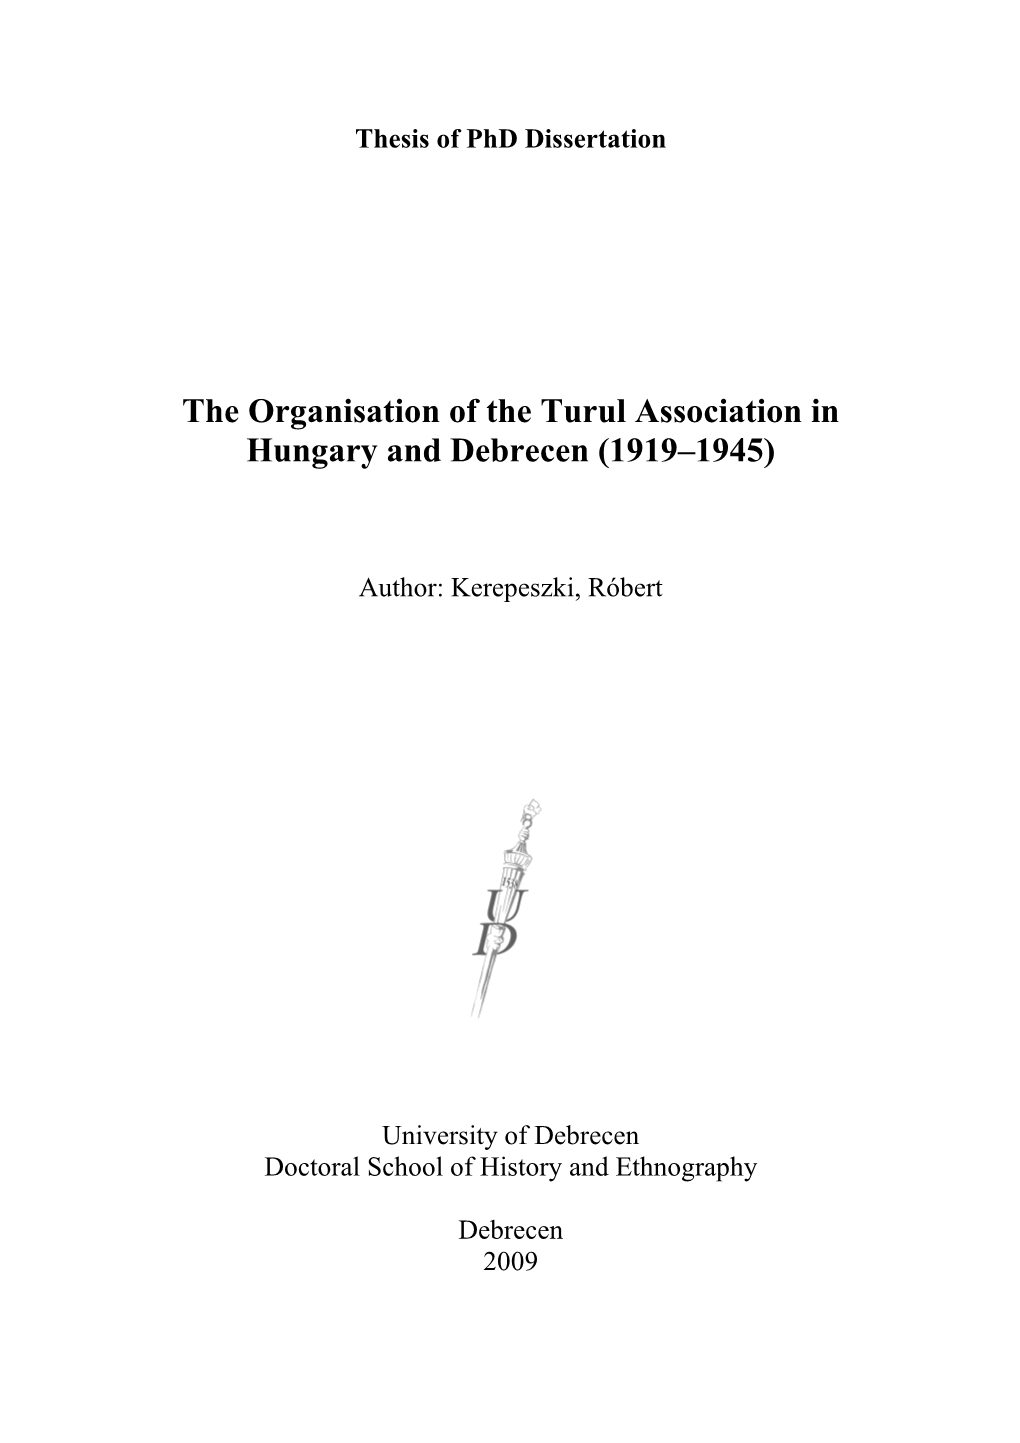 The Organisation of the Turul Association in Hungary and Debrecen (1919–1945)